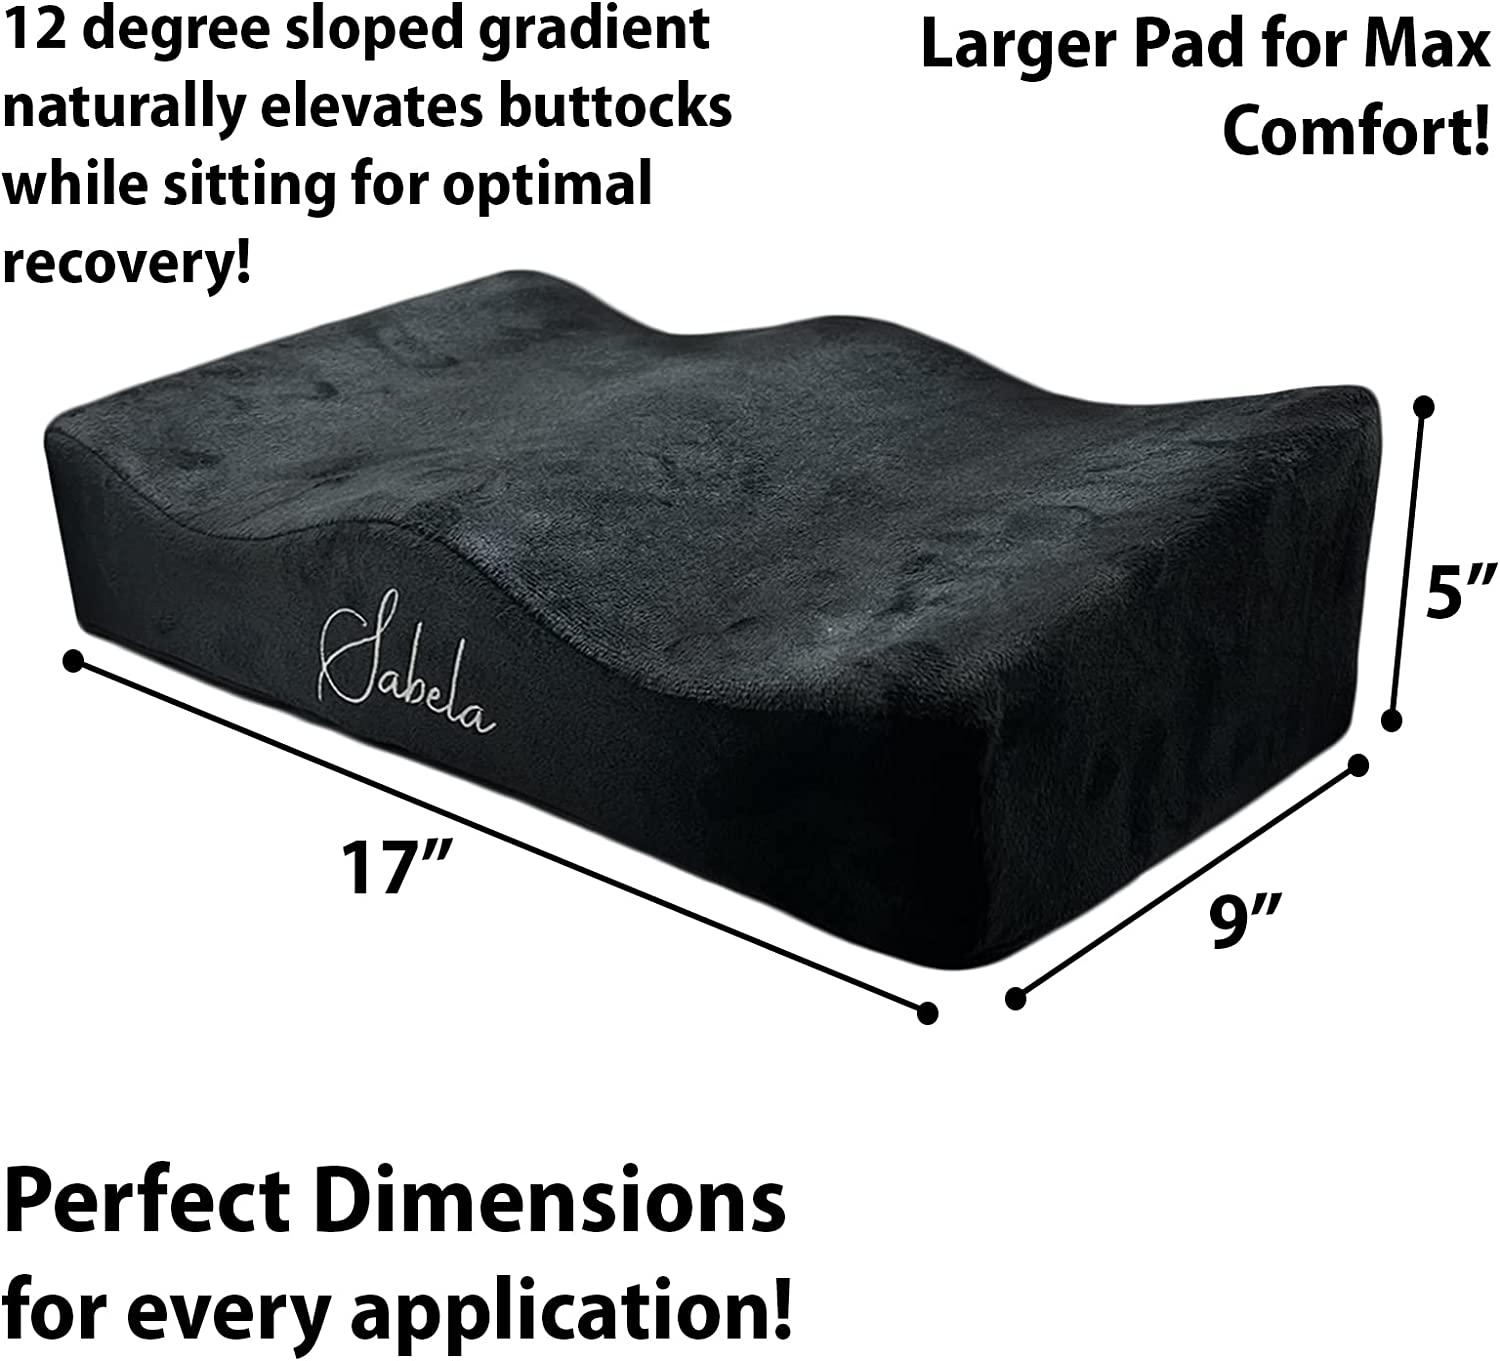 SABELA Brazilian Butt Lift BBL Pillow for Post Surgery Recovery +  Drawstring Bag, Fitted Contour for Maximal Comfort, Inclined Surface for  Safe & Optimal Recovery